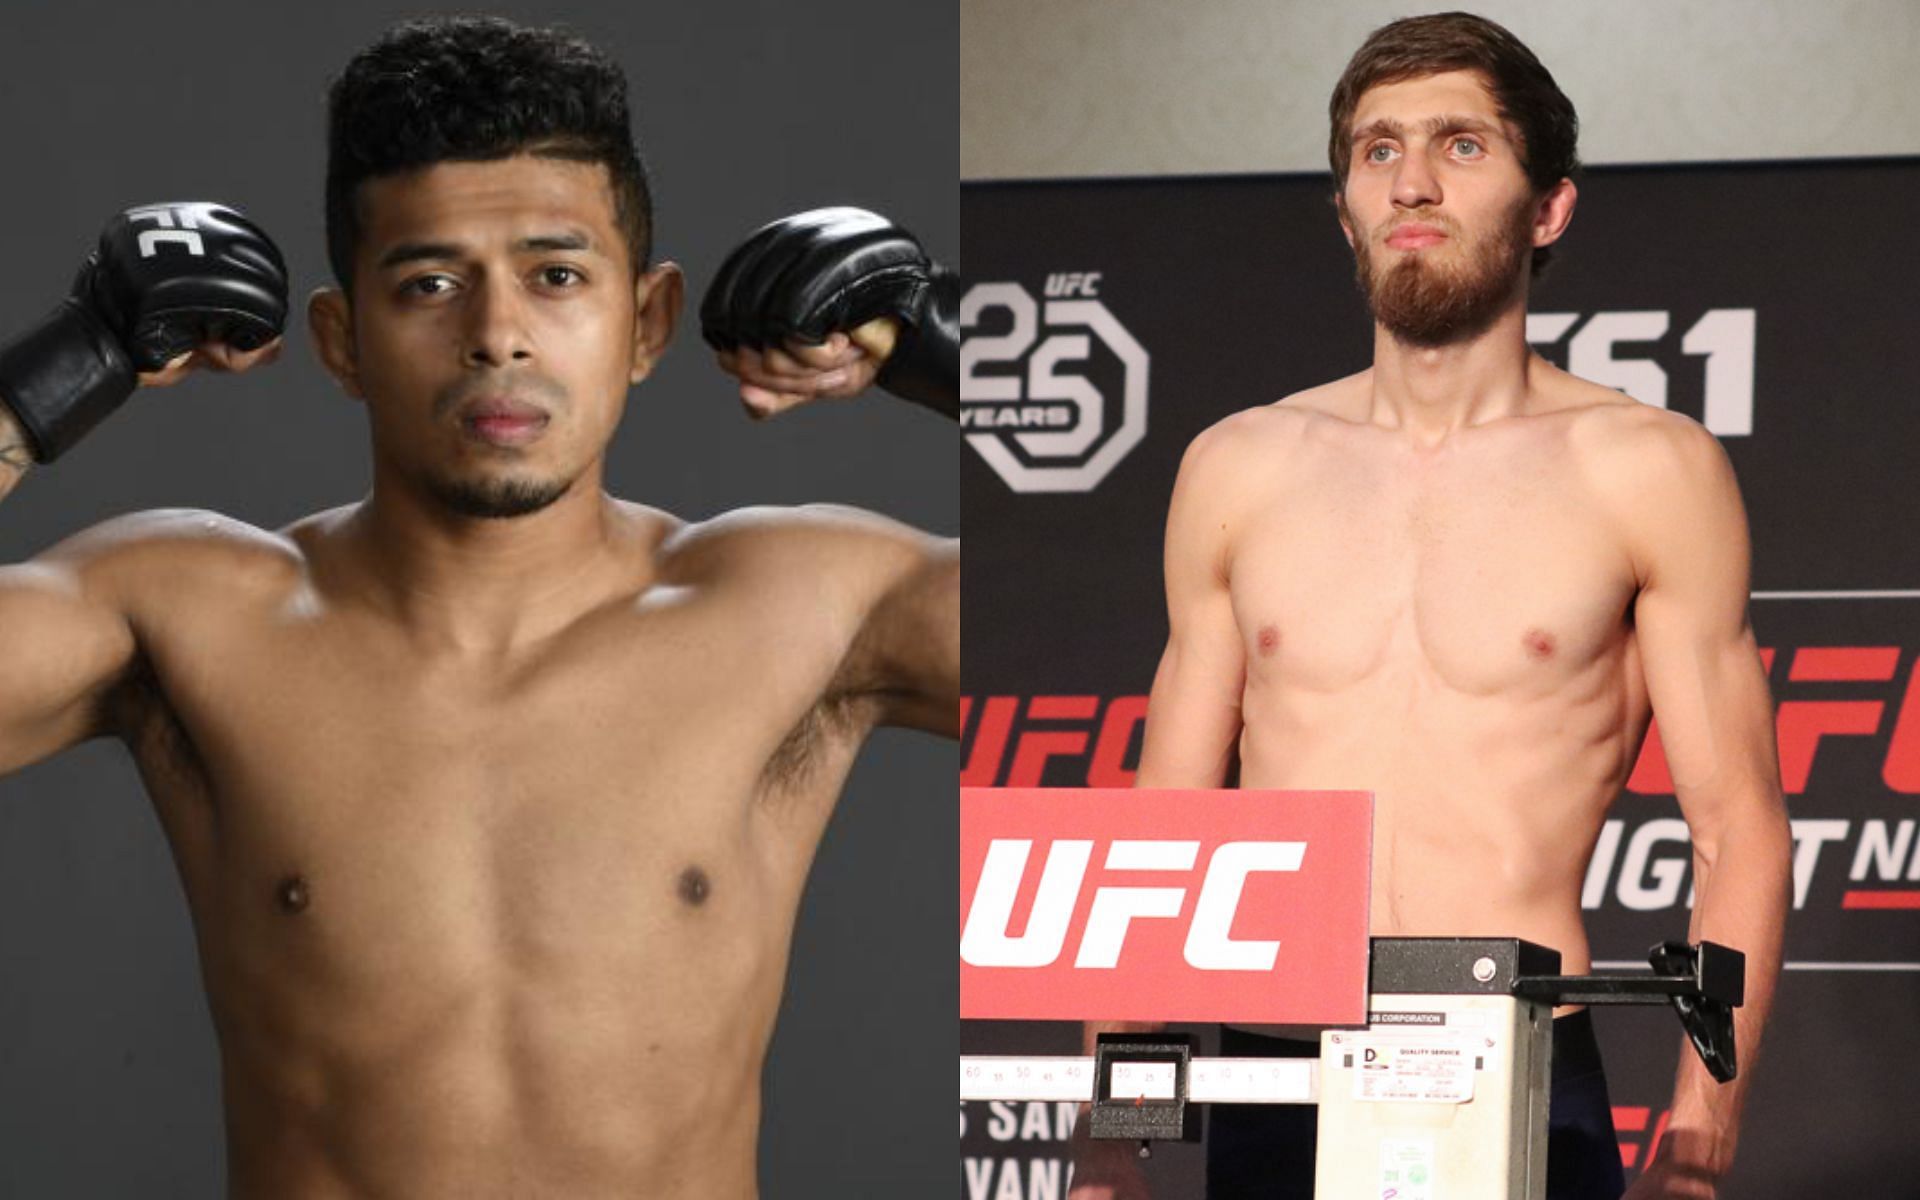 Jonathan Martinez (left) and Said Nurmagomedov (right) [Image courtesy: Official UFC website and MMA Junkie] 